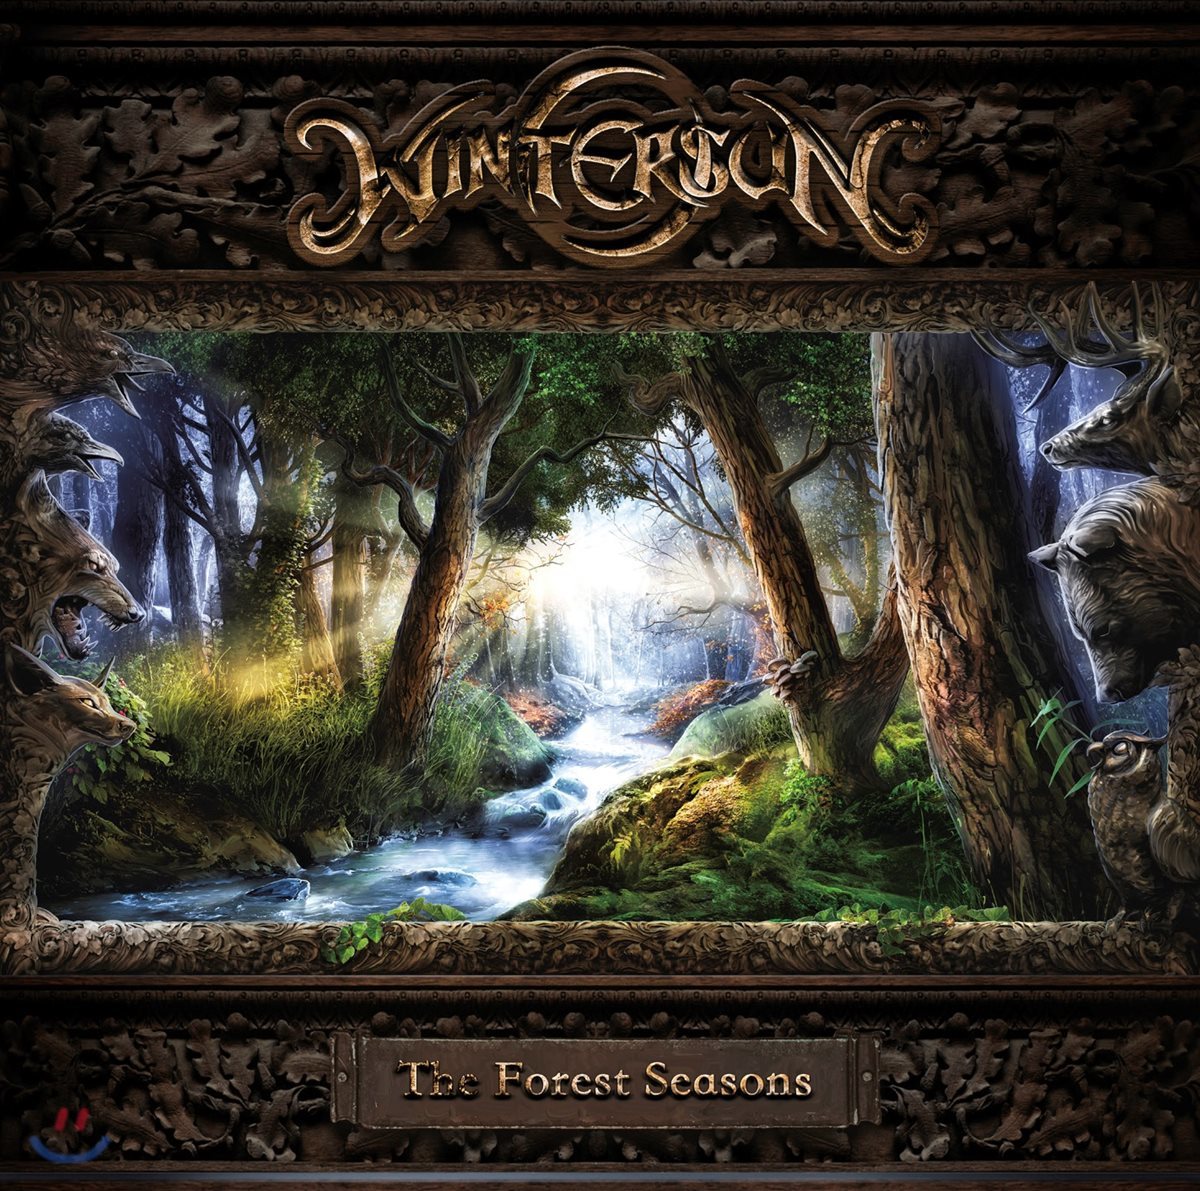 Wintersun - The Forest Seasons [Deluxe Edition] 윈터썬 3번째 앨범